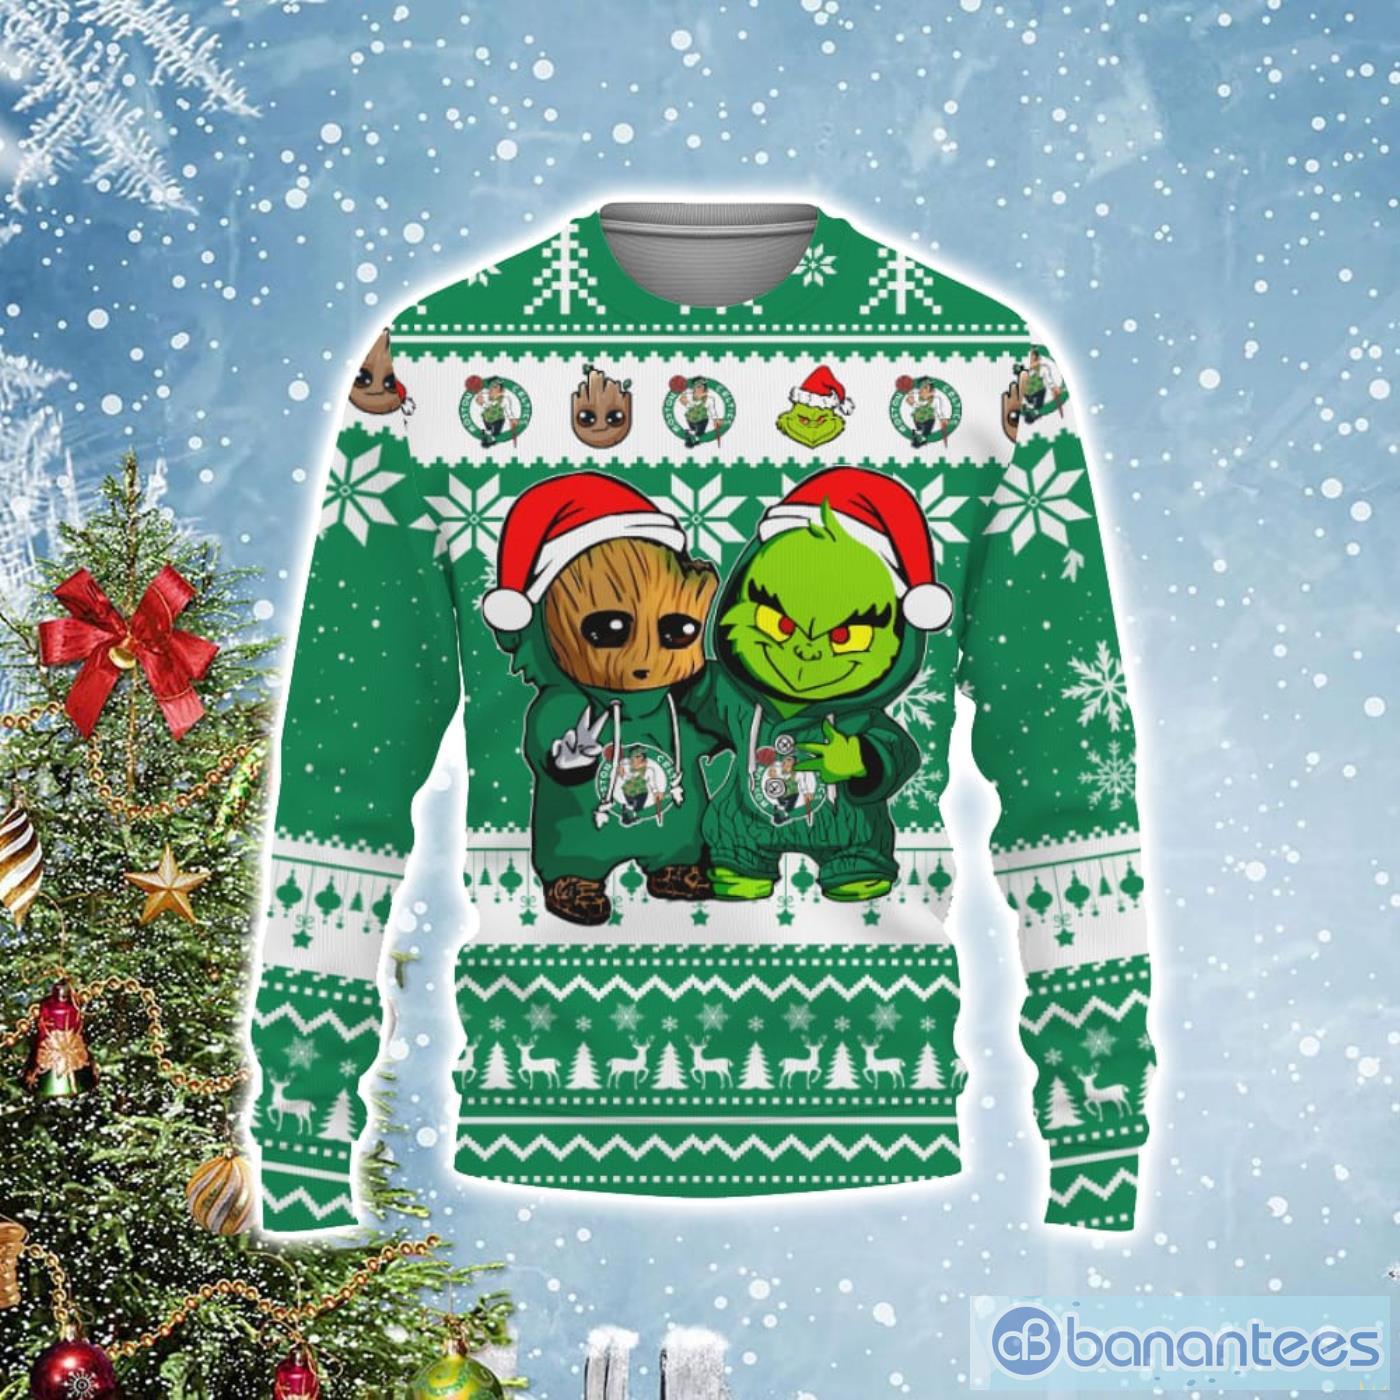 Boston Celtics Baby Groot And Grinch Best Friends Football Ugly Christmas Sweater Product Photo 1